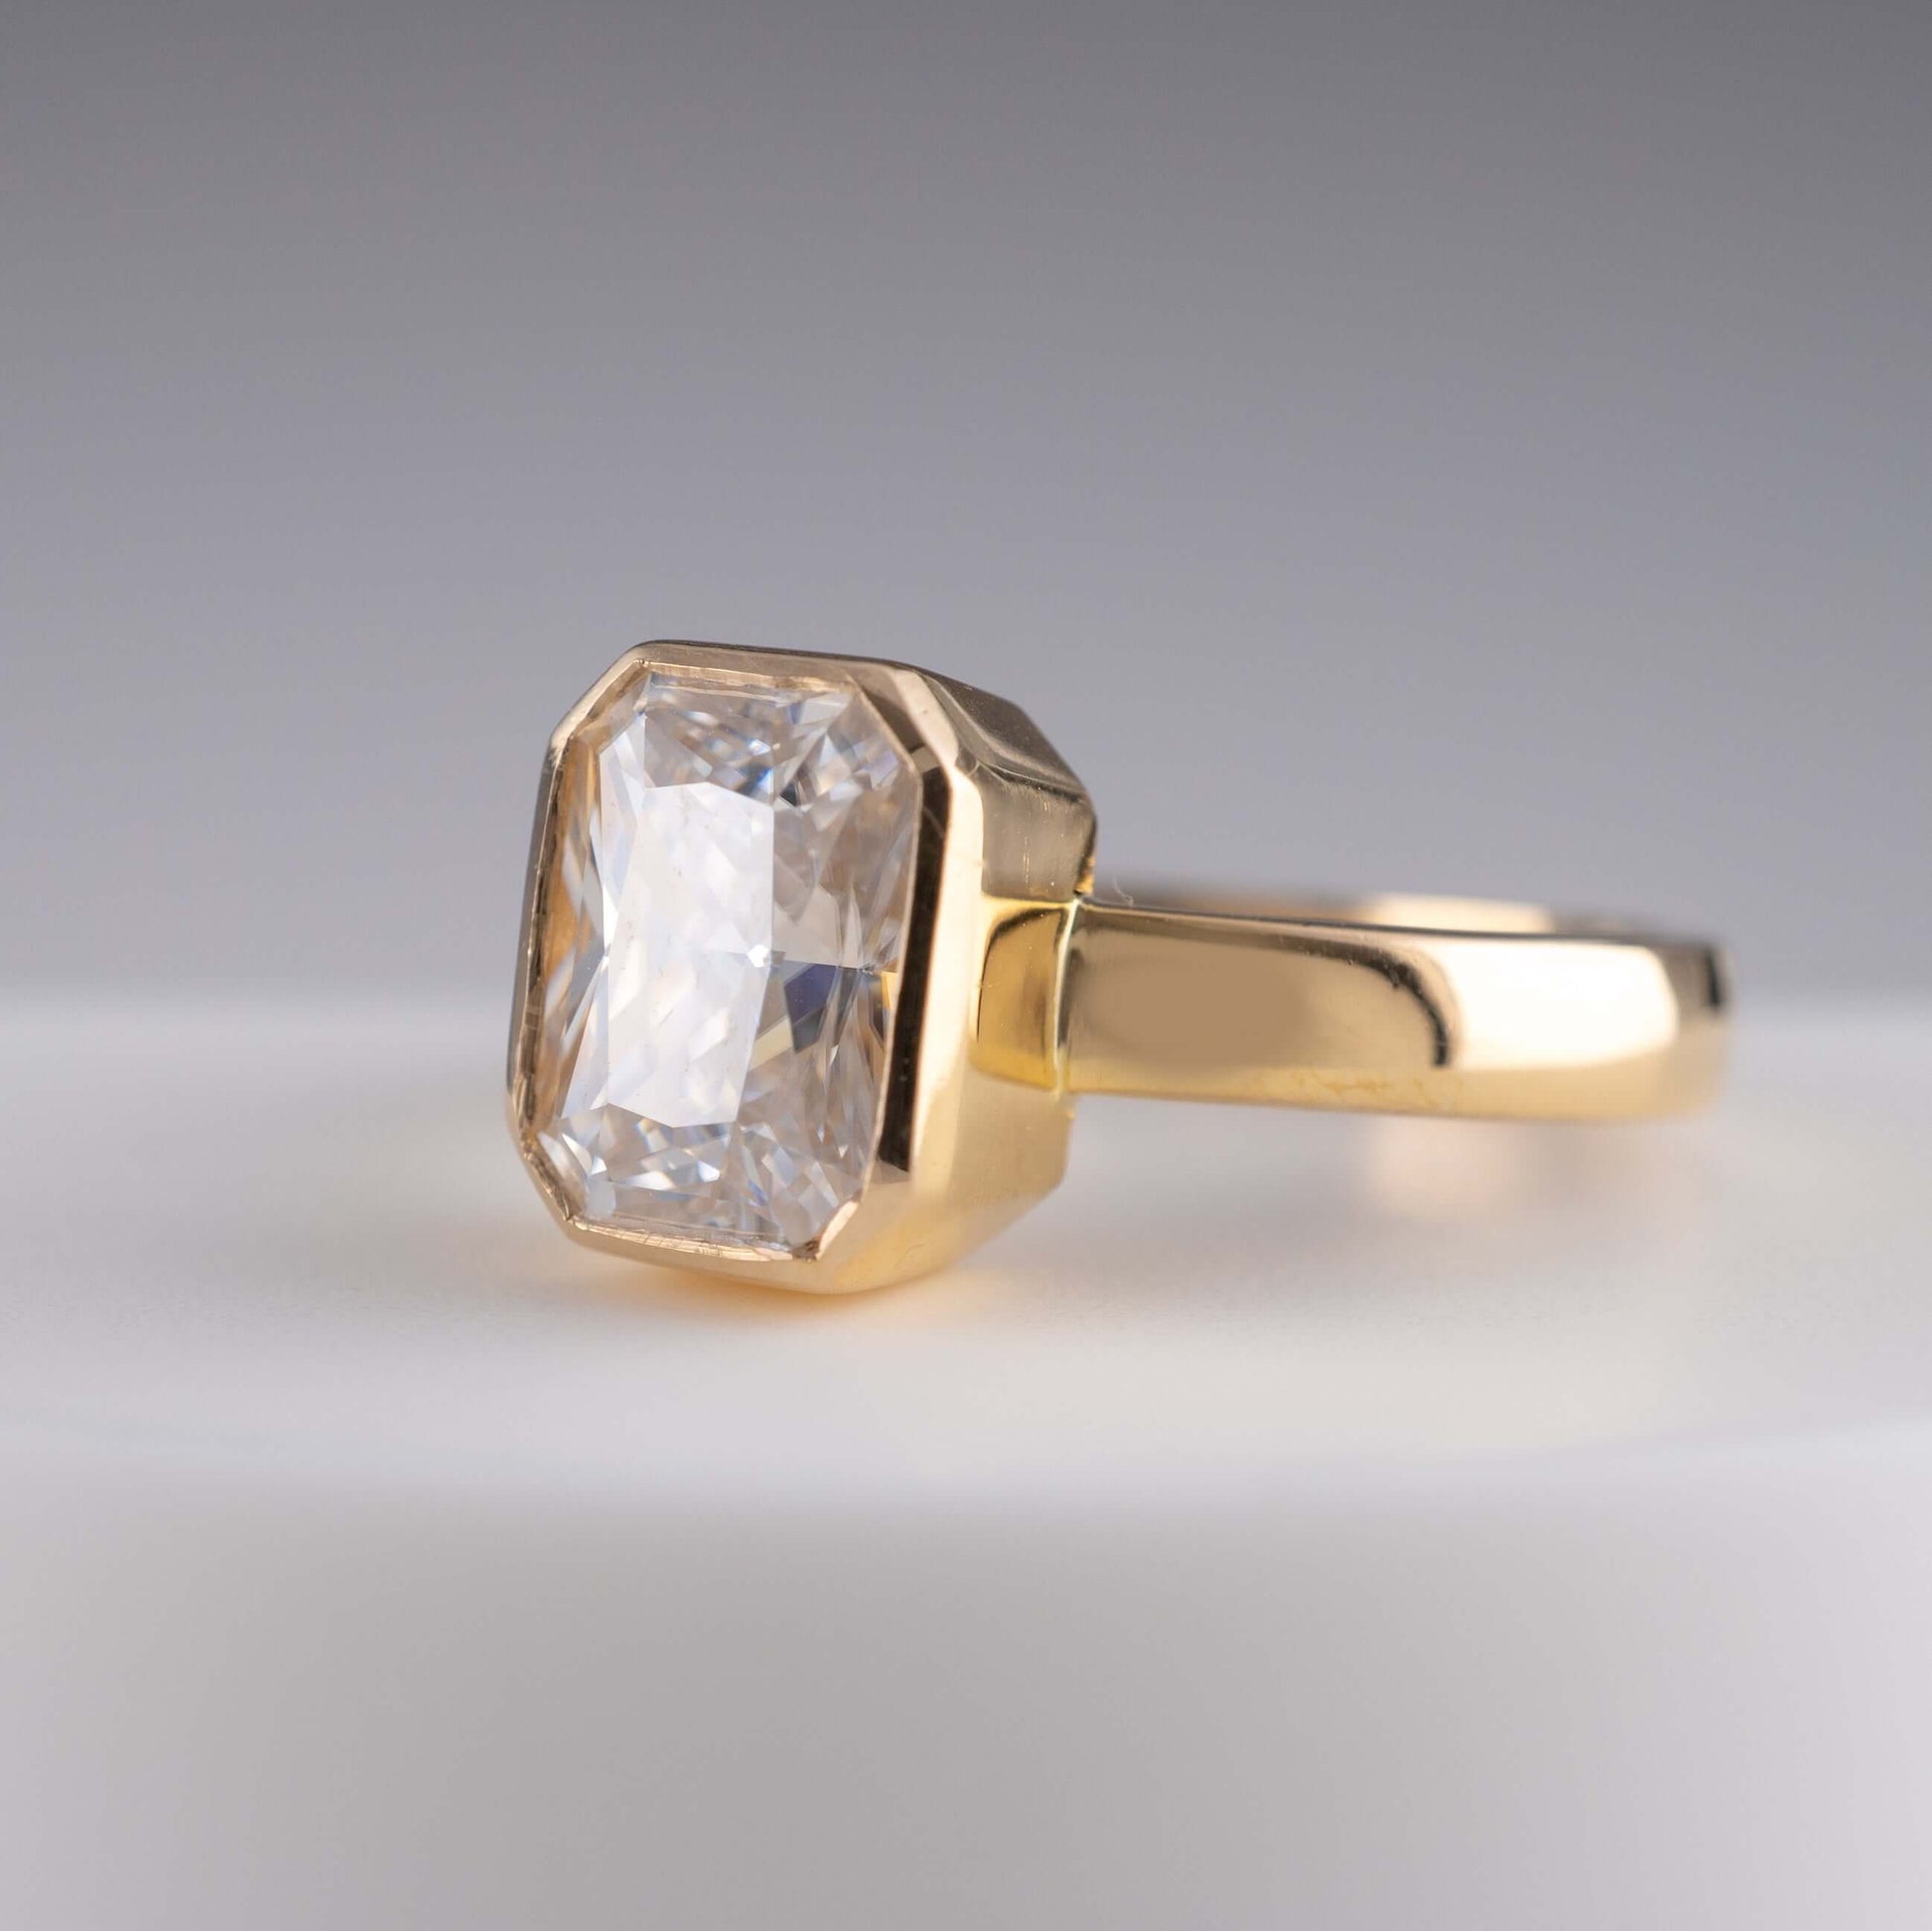 Size K 14K Moissanite Octagon Ring with Full Hallmarks - Finely Crafted by Hunters Fine Jewellery